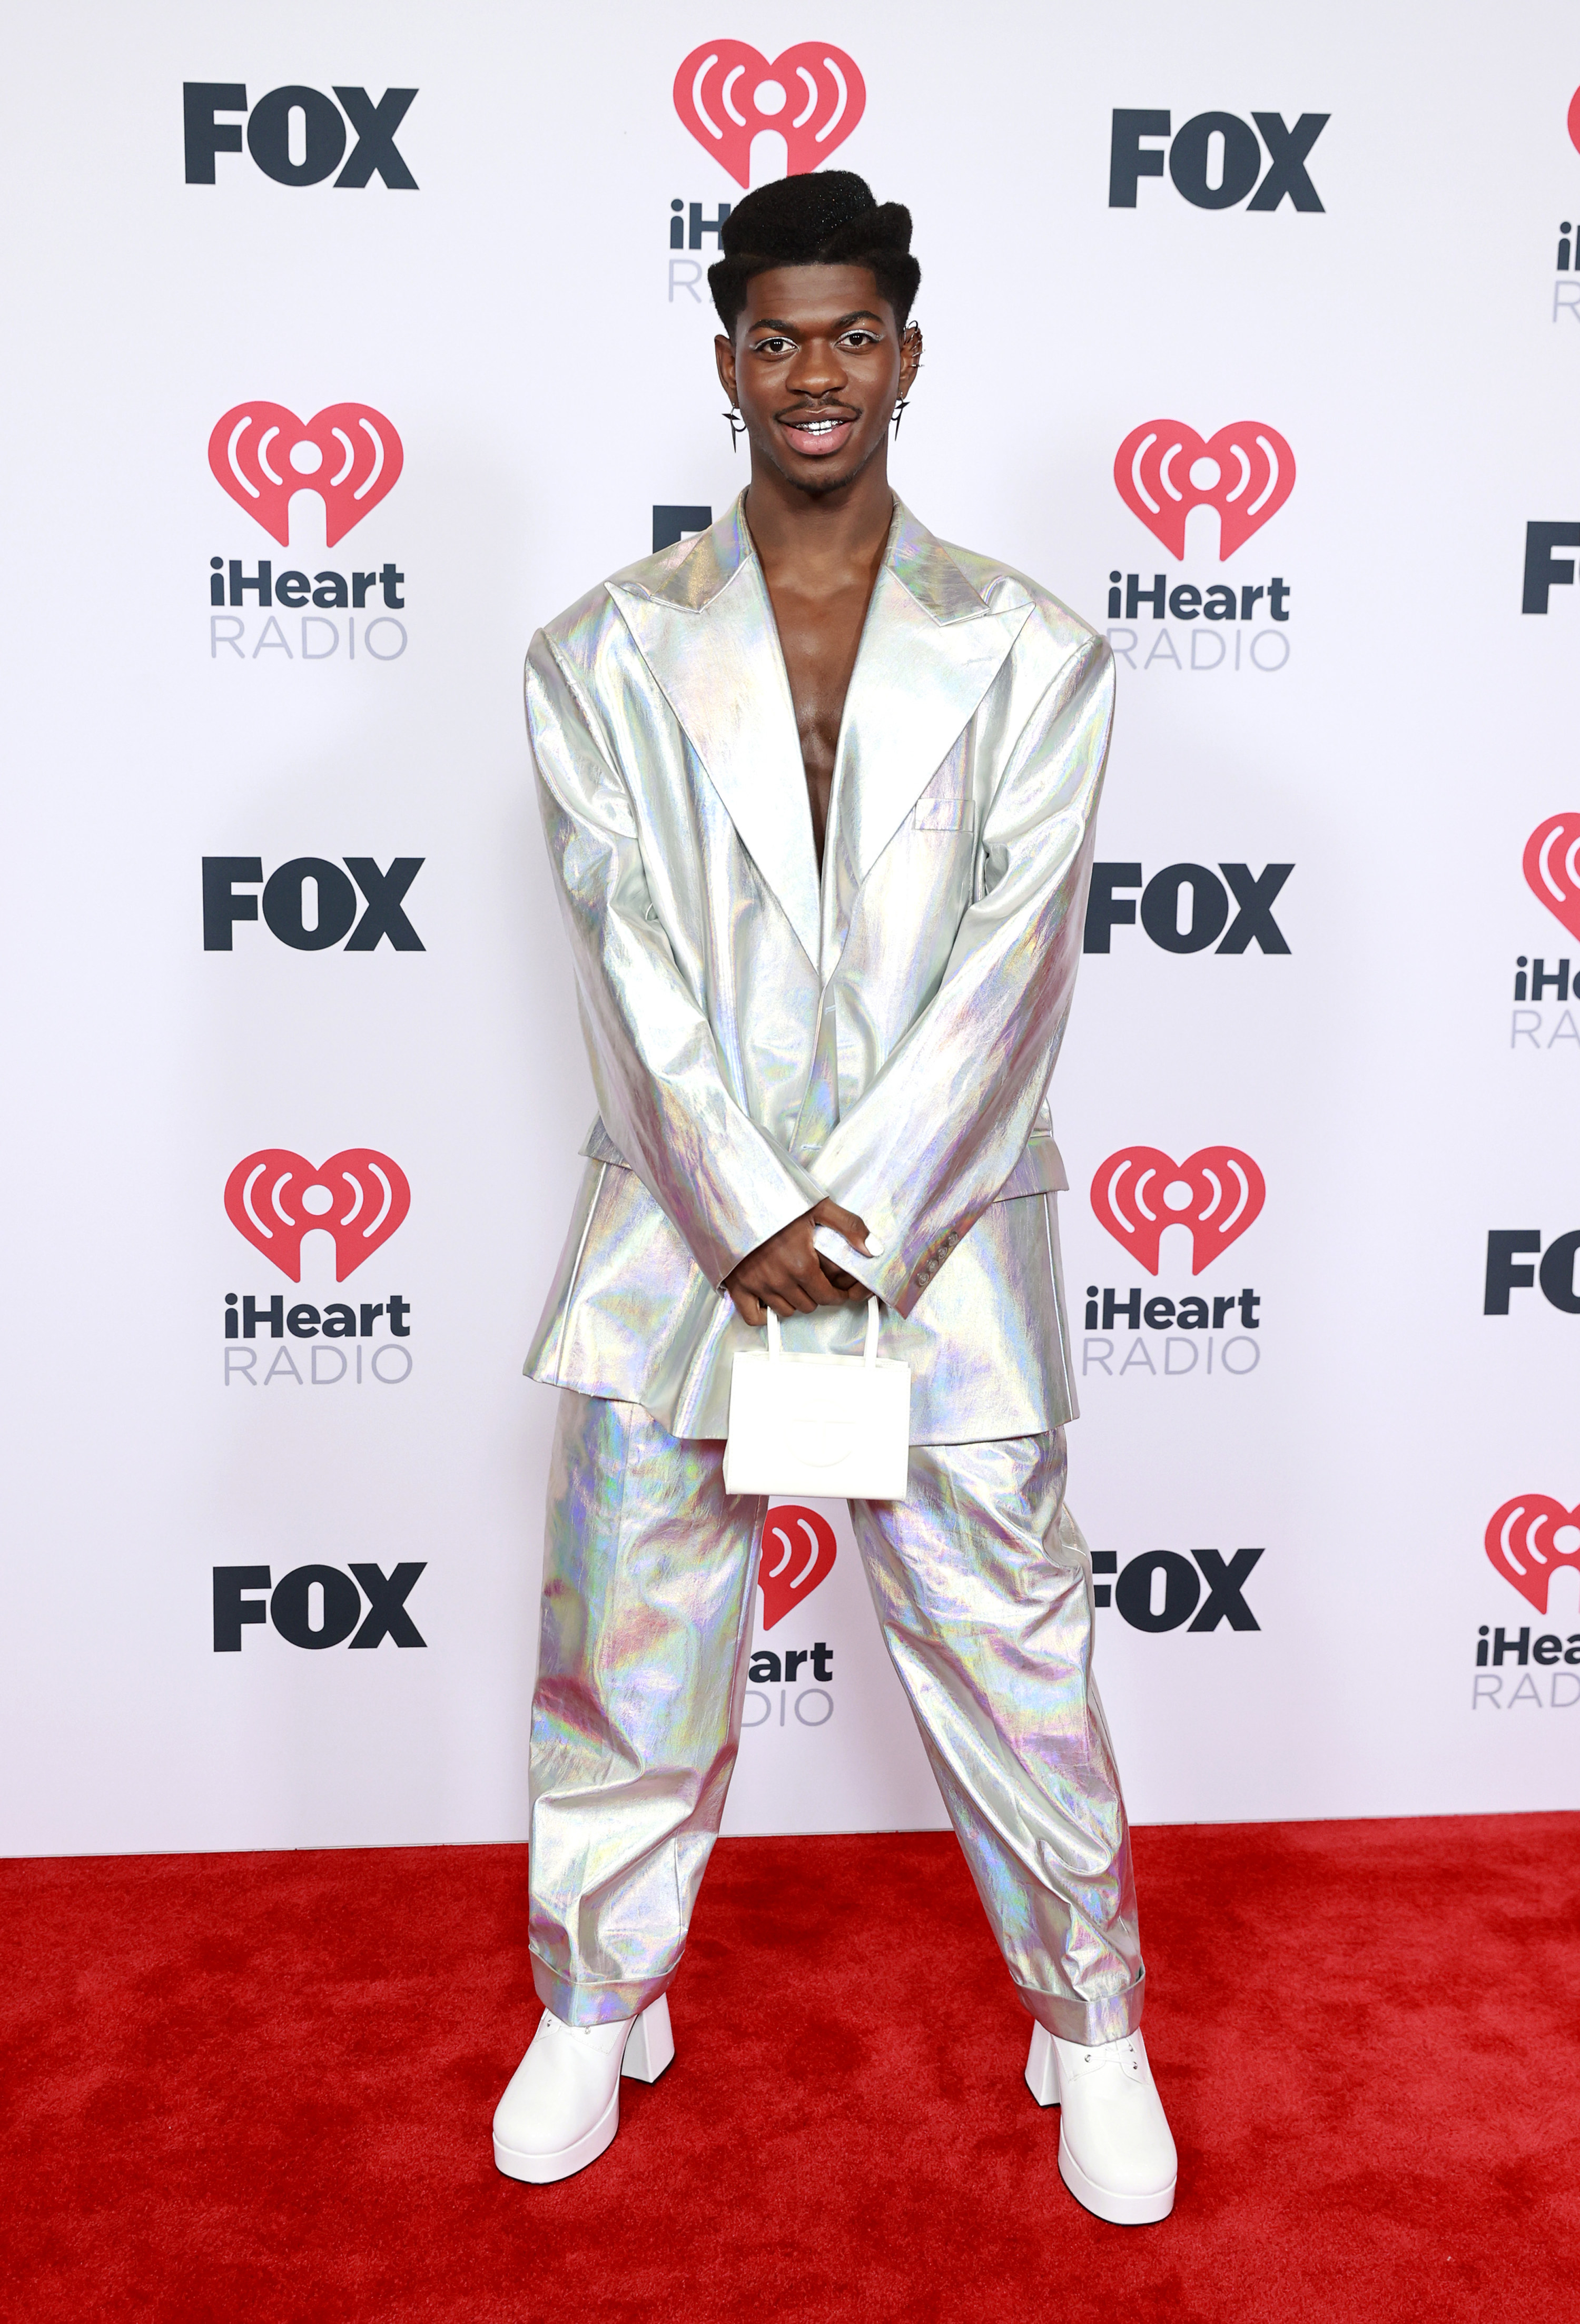 Lil Nas X at the 2021 iHeartRadio Music Awards